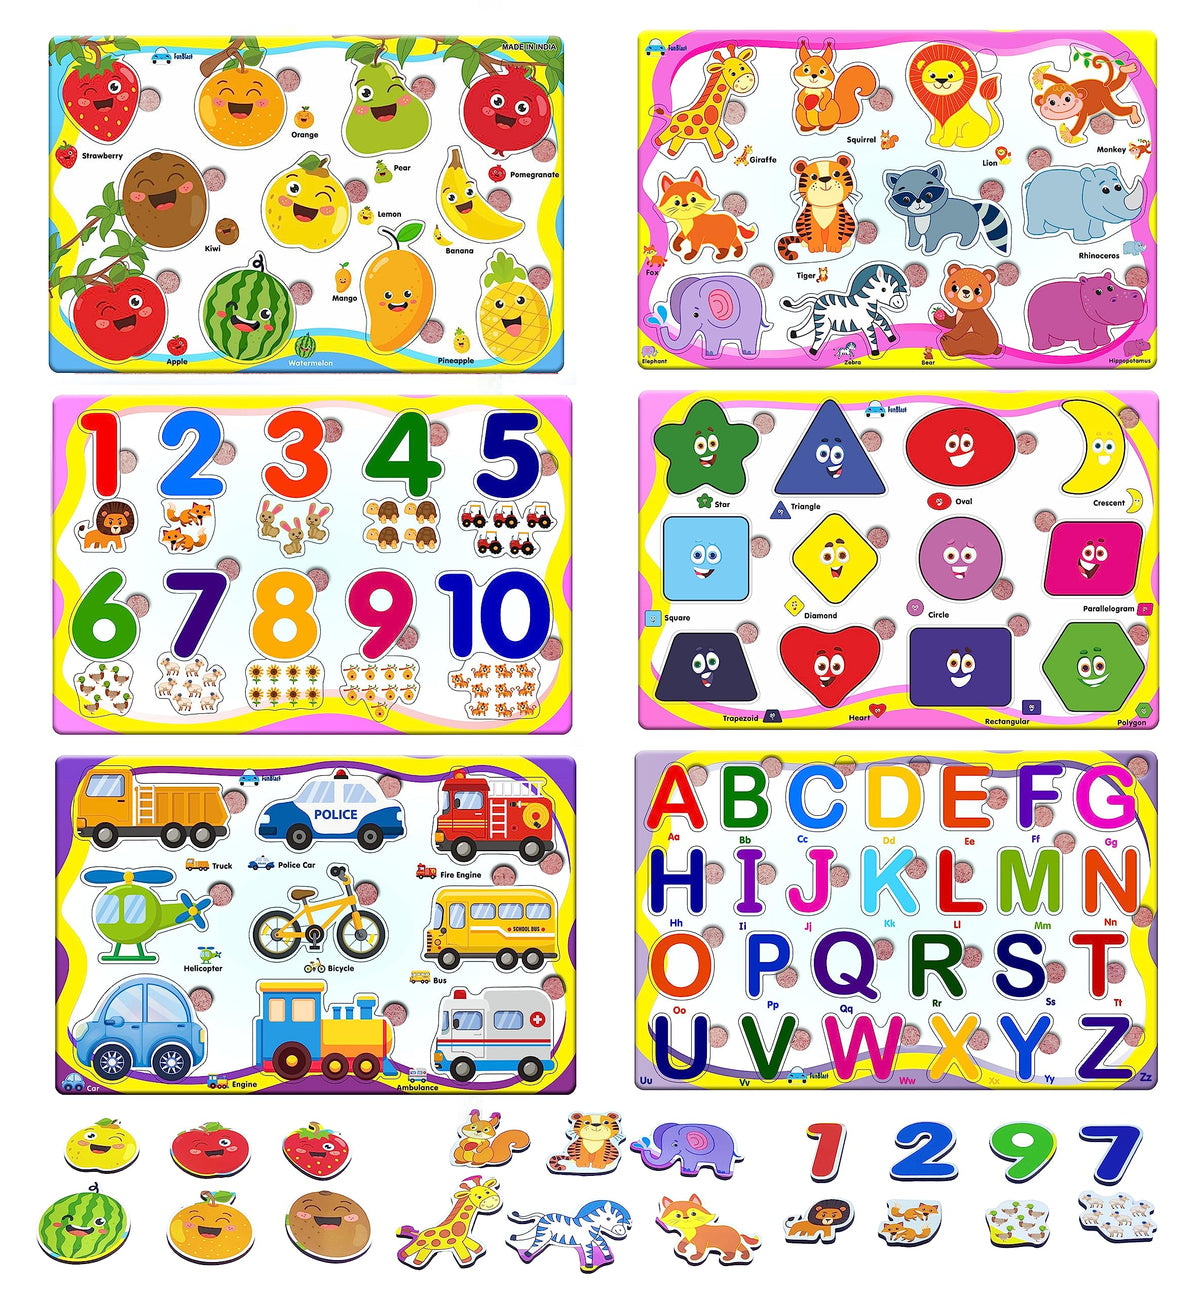 FunBlast (Set of 6 Puzzle Board) Wooden Colorful Learning Educational Board for Kids Set of 6 Puzzle Board Includes Fruits, Numbers, Shapes and Symbols, Animals, Vehicles, Alphabet